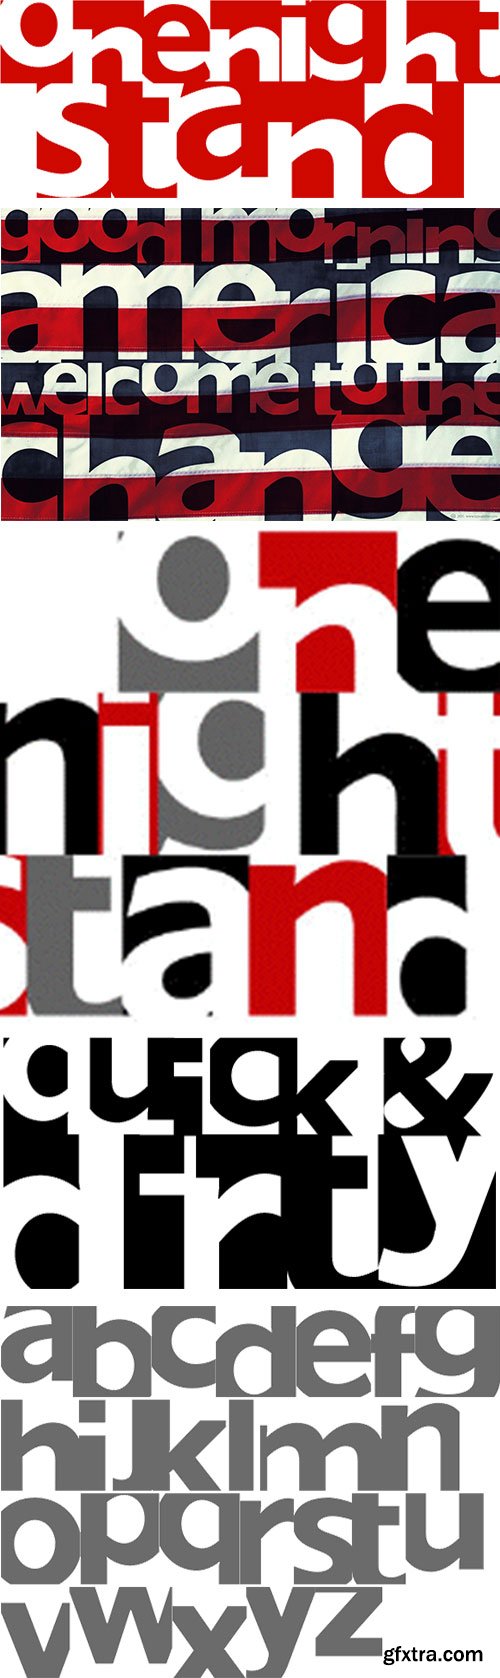 One Night Stand - The Perfect Way to Seduce Readers